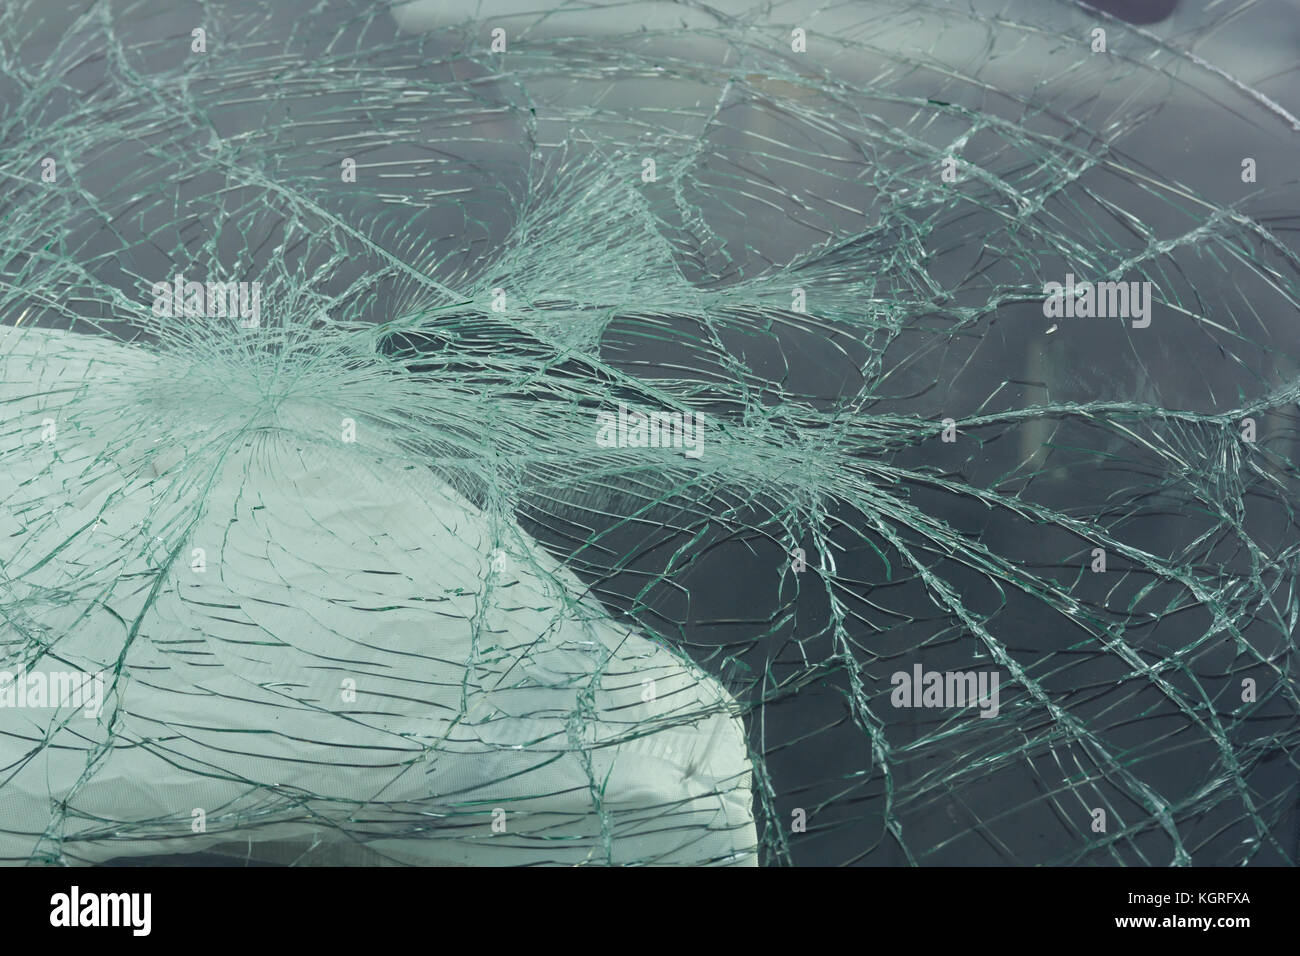 Accident damaged windscreen or windshield on a car with a deployed airbag in the background Stock Photo